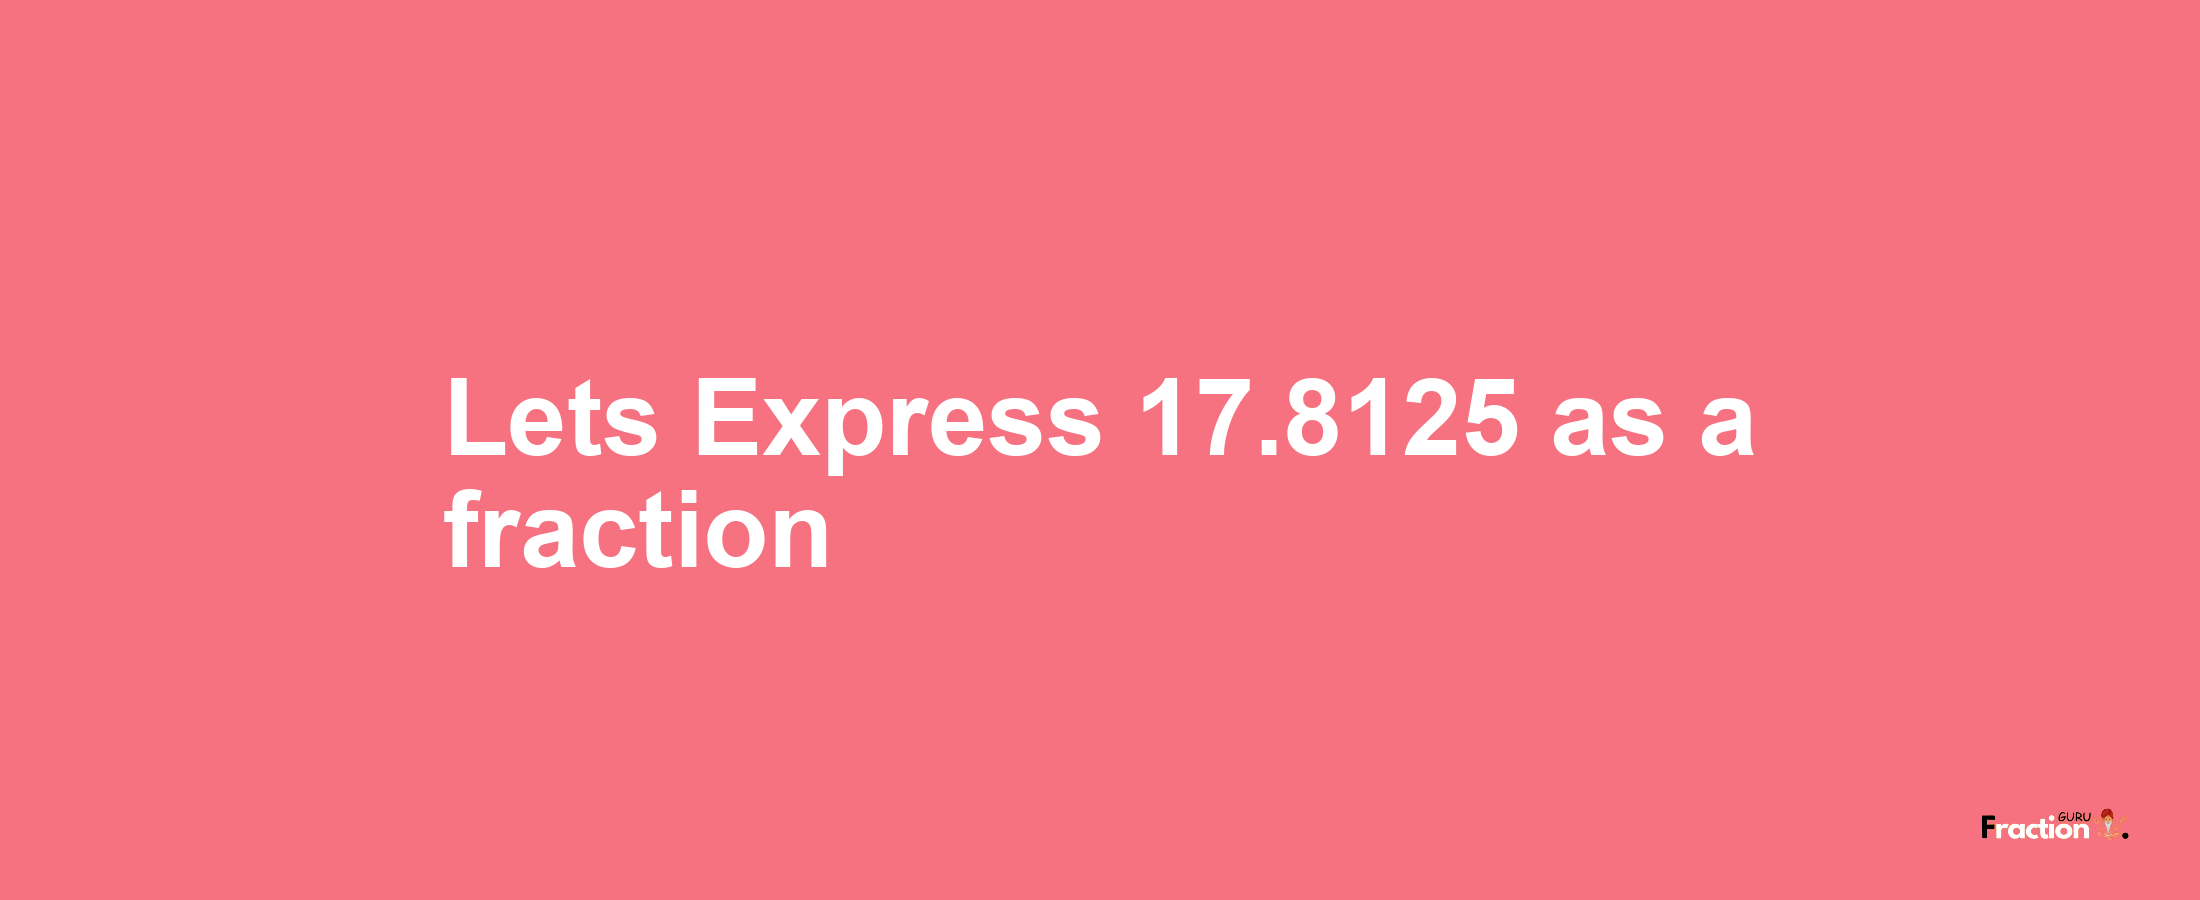 Lets Express 17.8125 as afraction